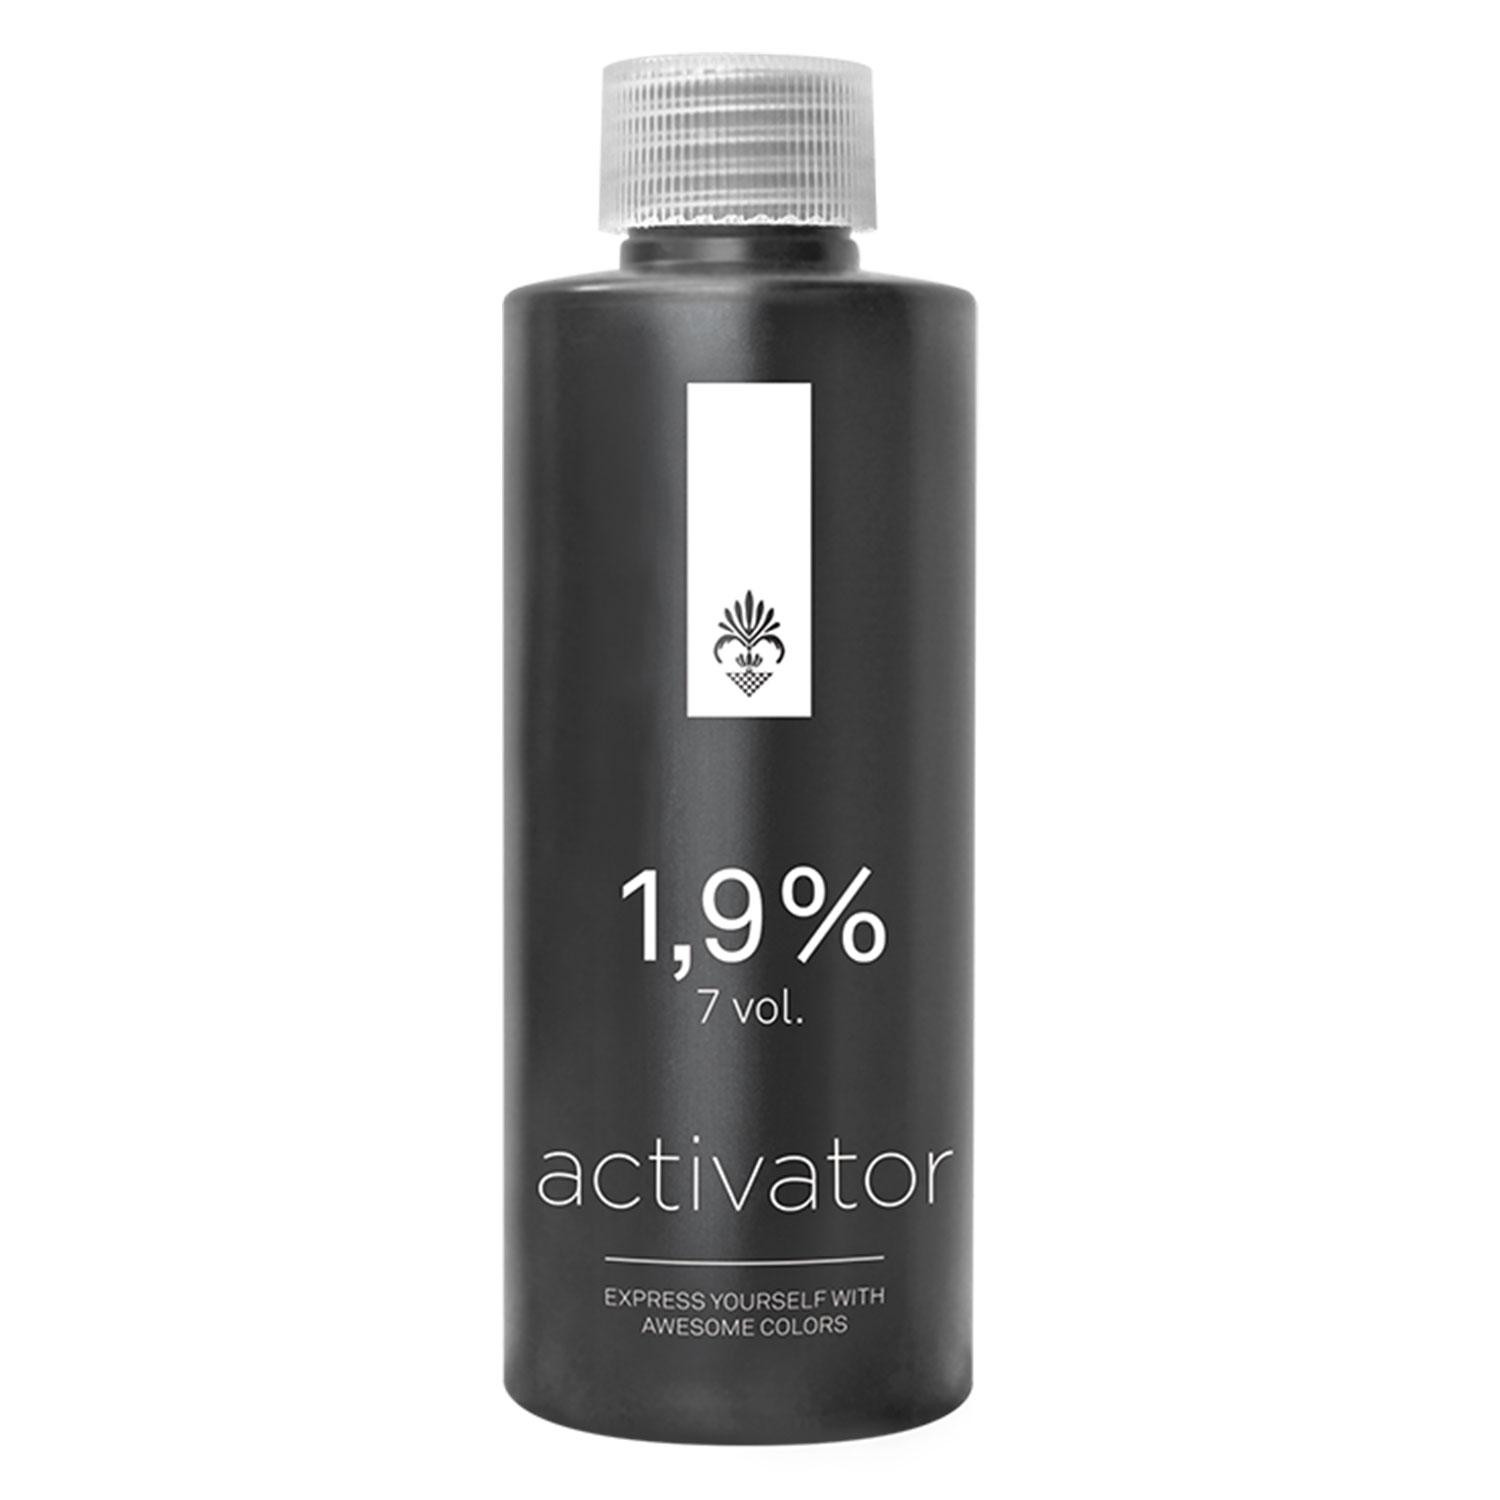 AWESOMEcolors - Activator 1.9%